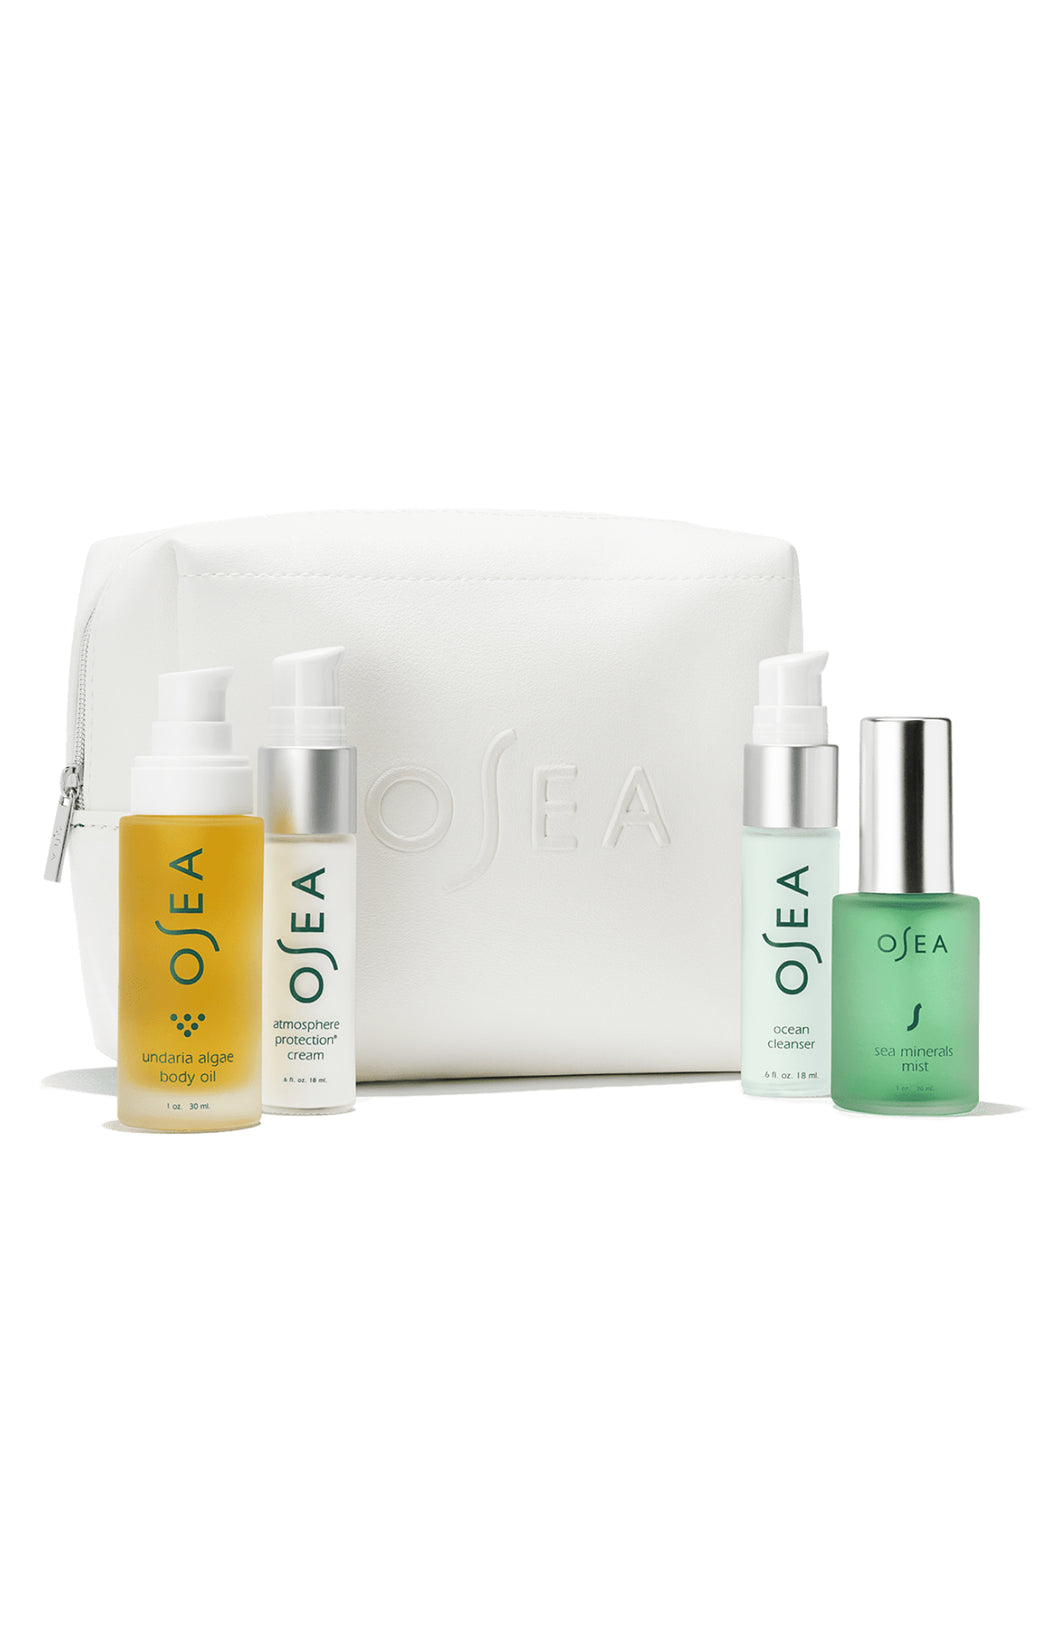 Osea Daily Essentials Kit